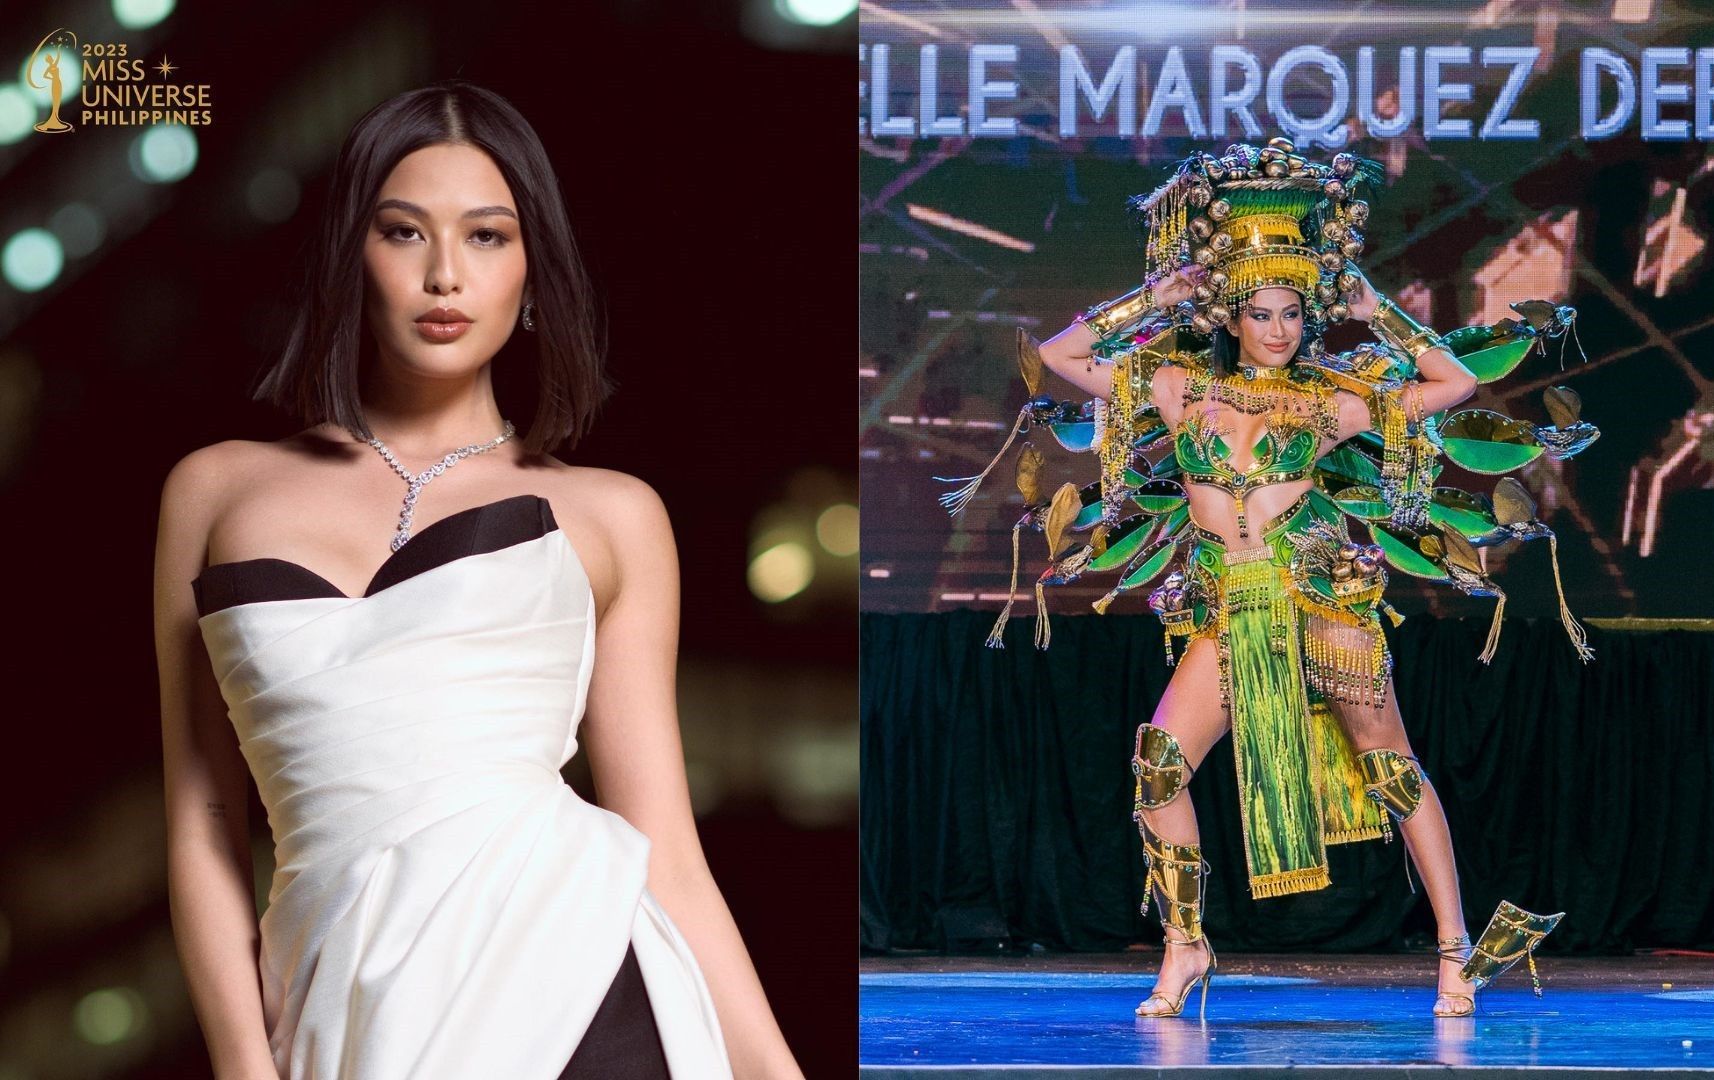 Michelle Dee, daughter of Melanie Marquez, is crowned Miss Universe Philippines 2023